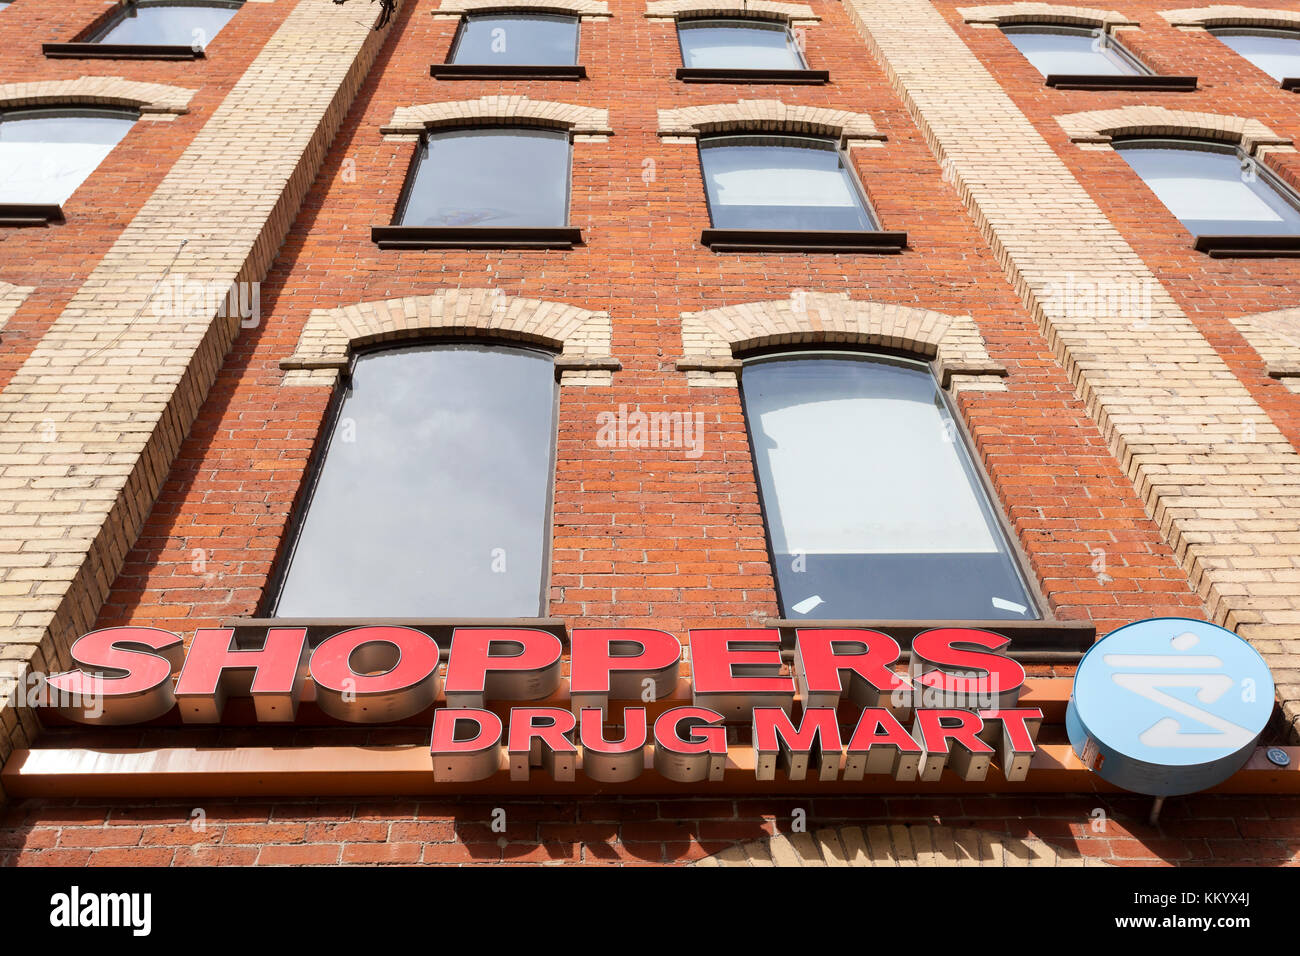 Toronto, Canada - Oct 21, 2017: Shoppers Drug Mart store in the city of Toronto, Canada Stock Photo